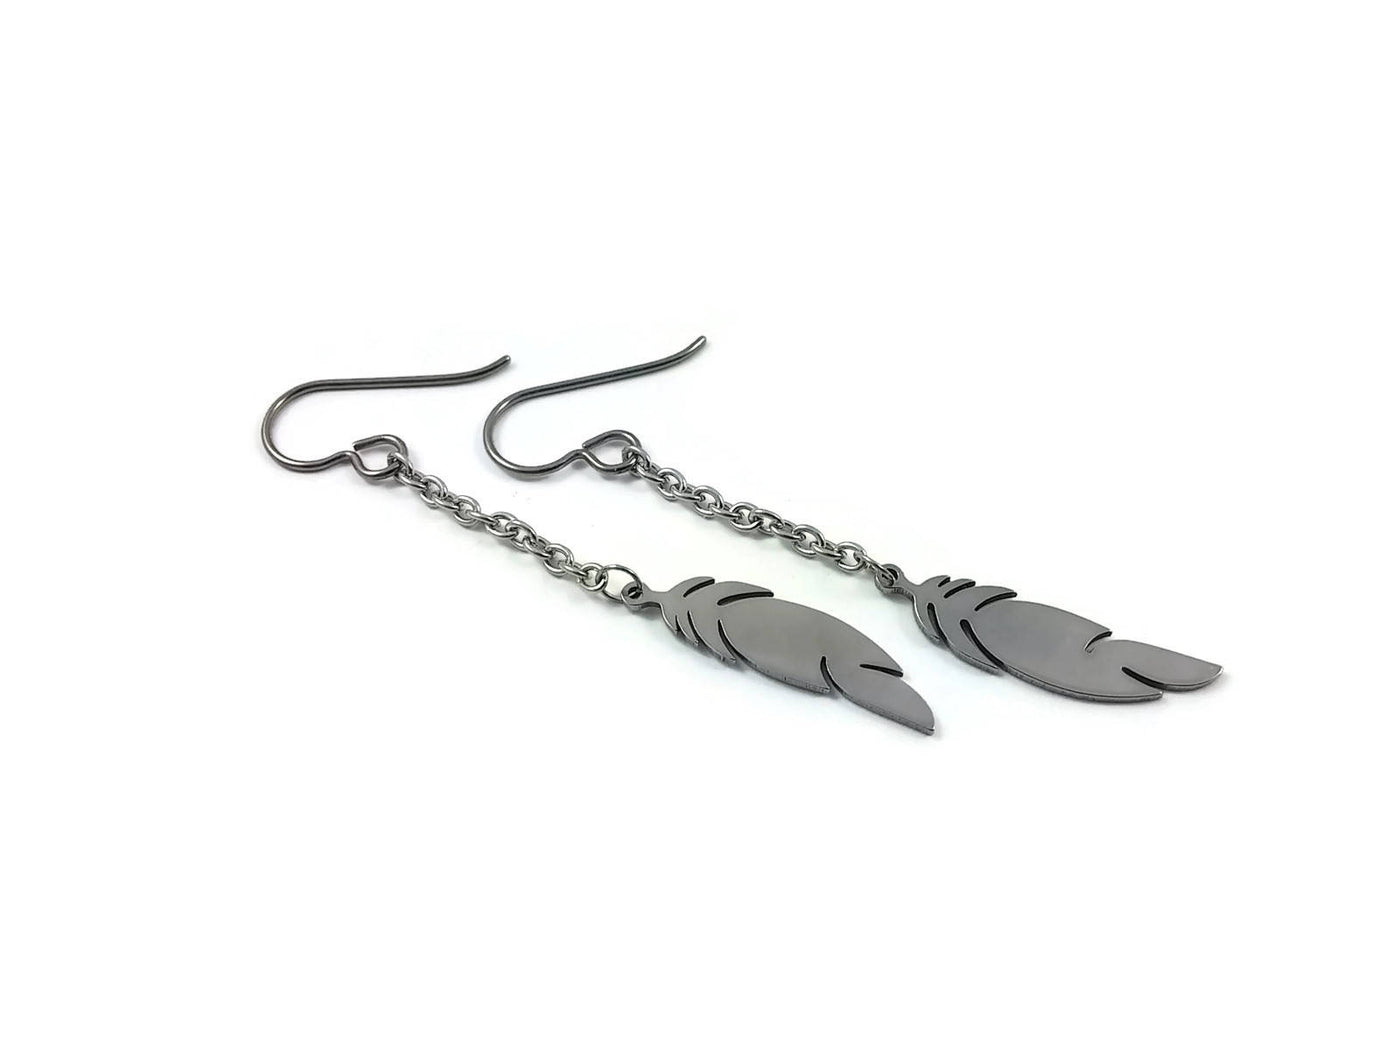 Feather silver chain dangle earrings - Hypoallergenic pure titanium and stainless steel